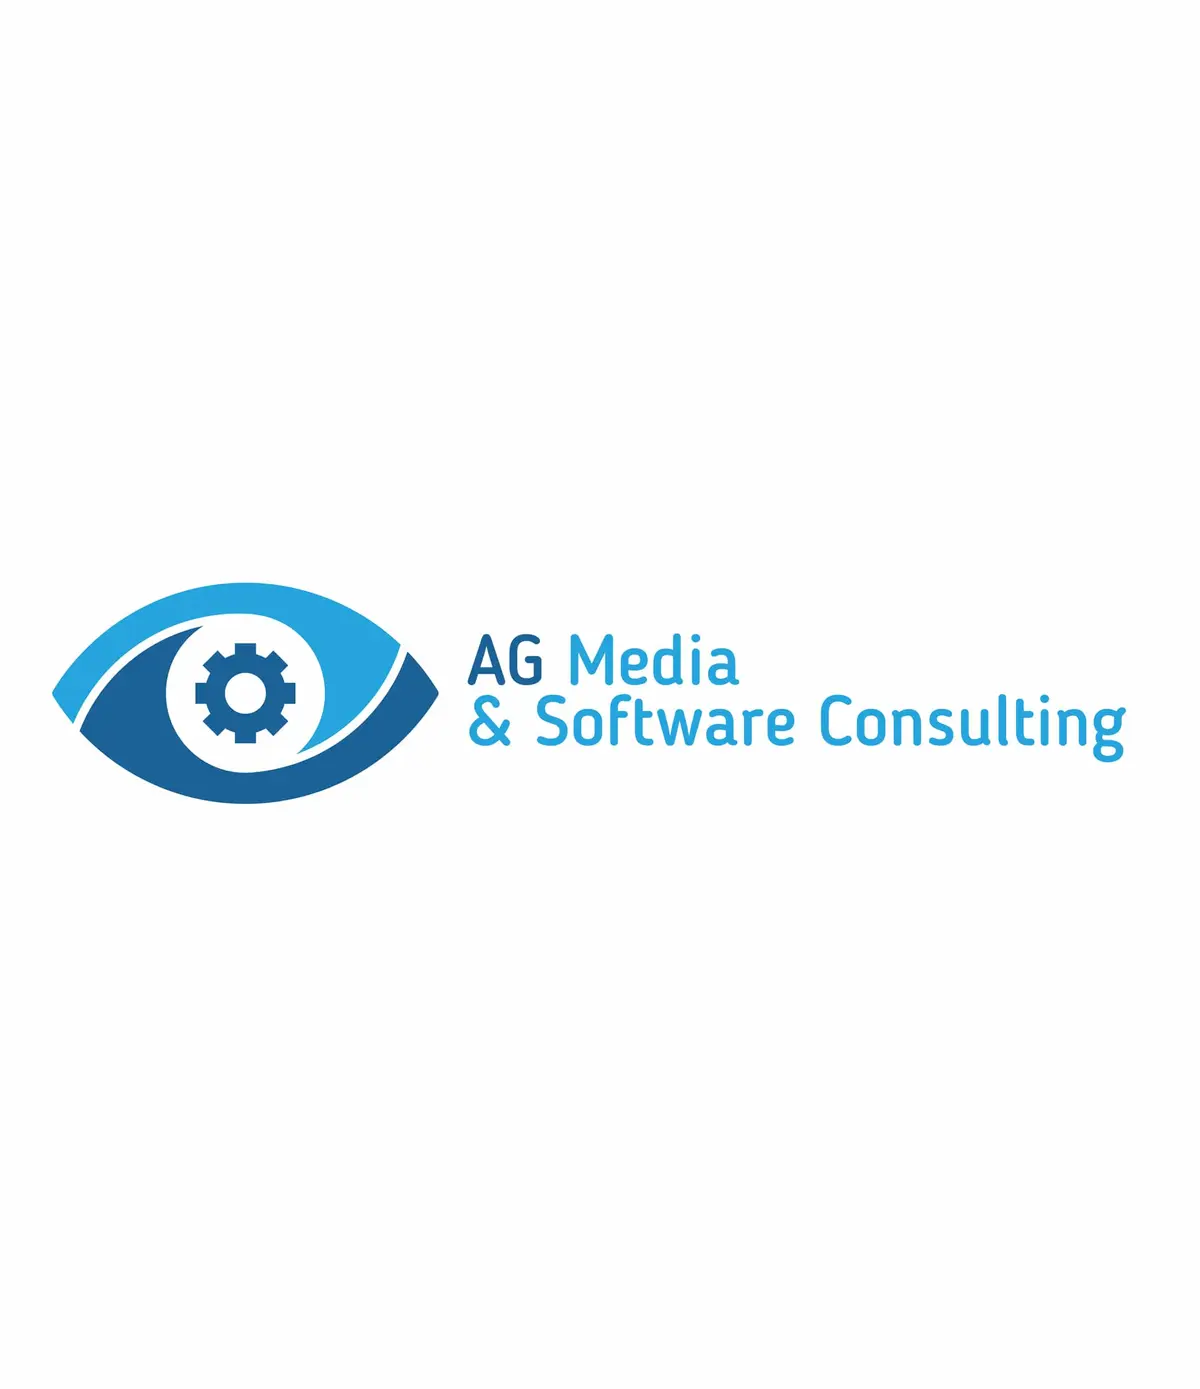 AG Media & Software Consulting